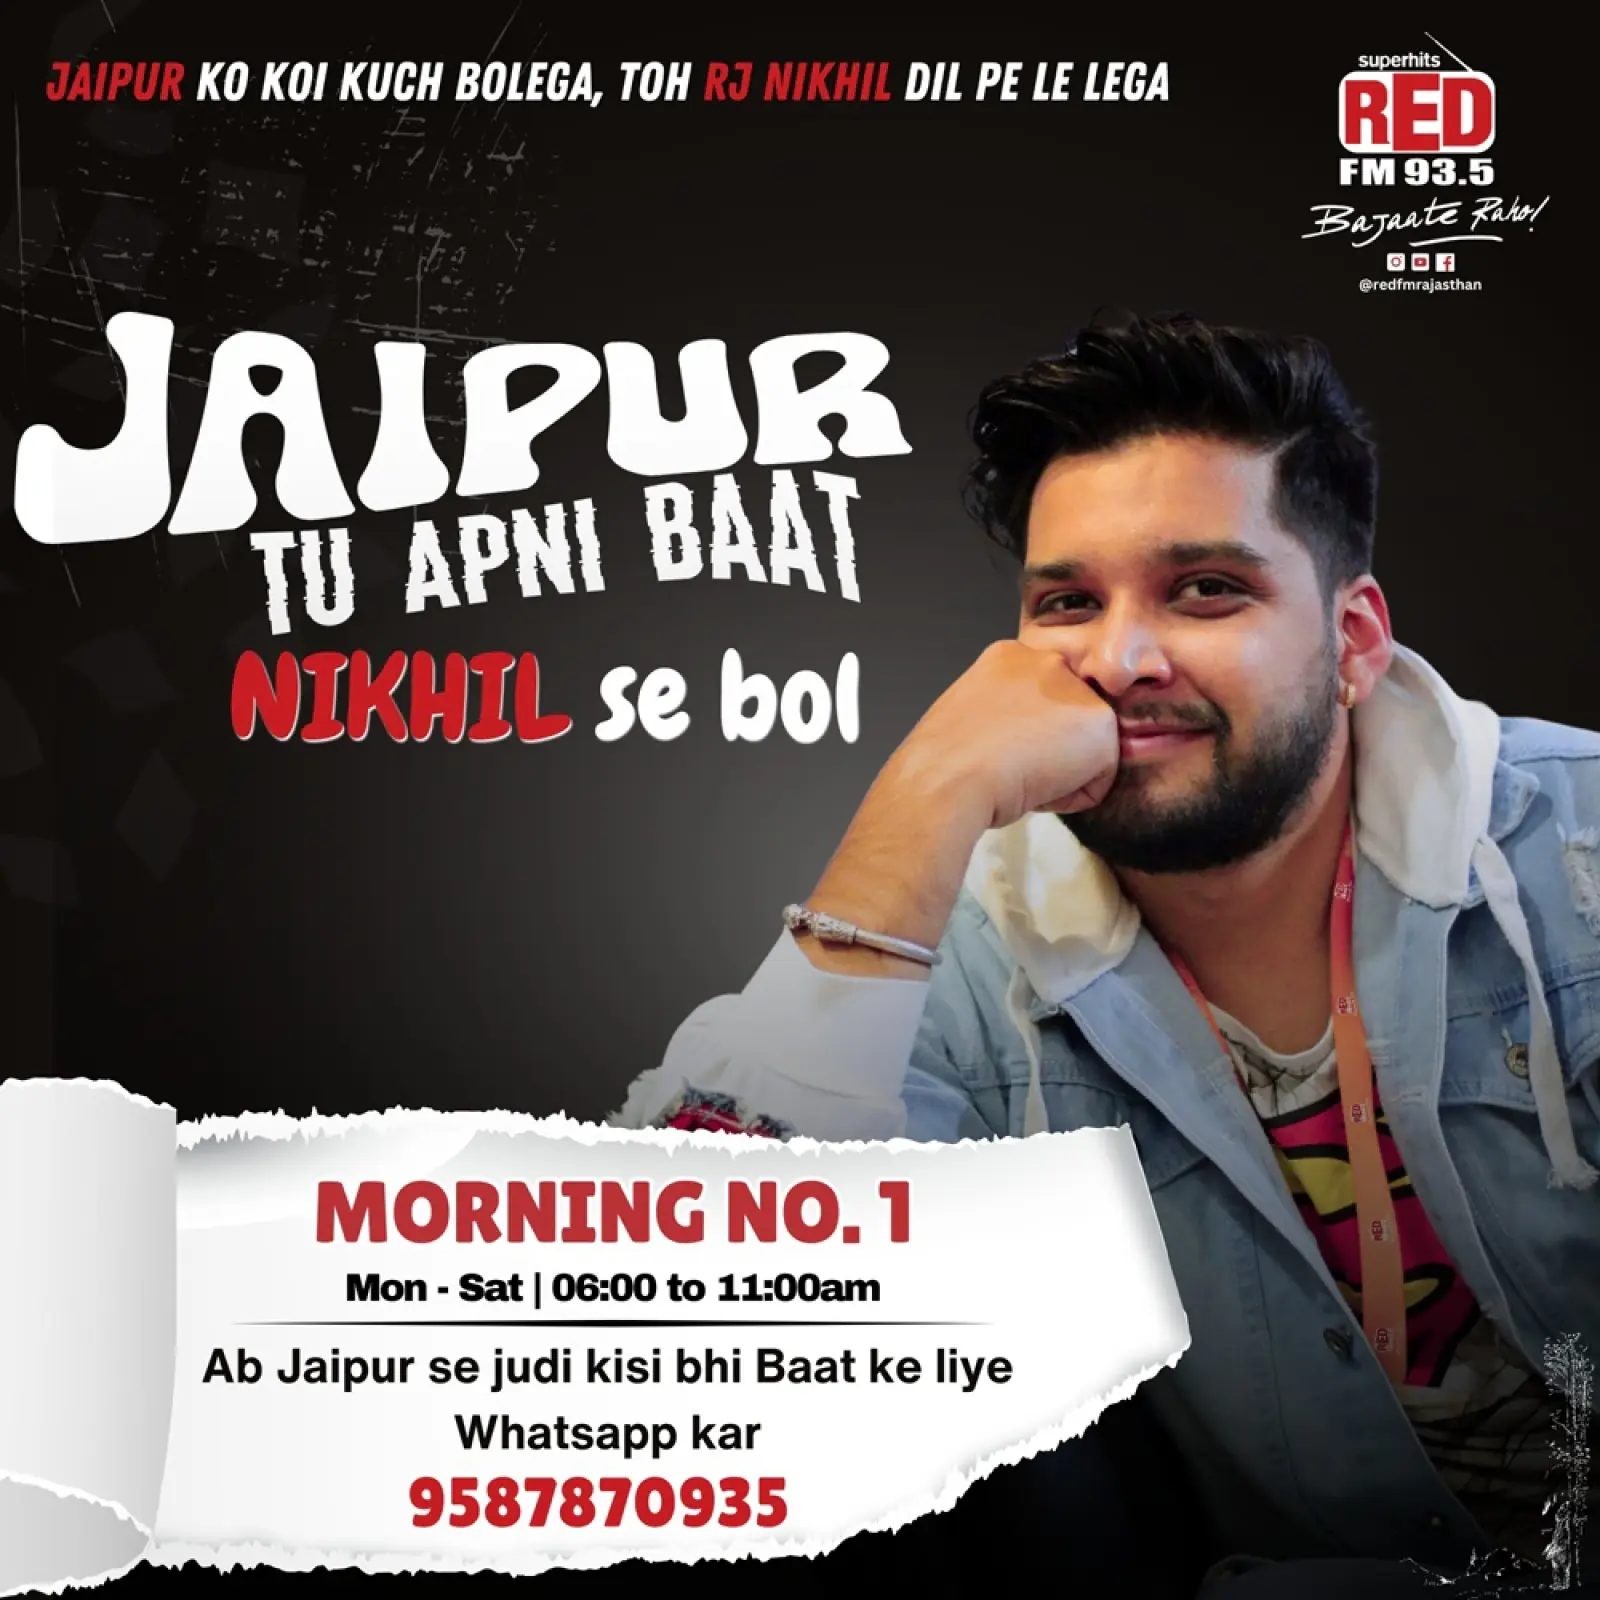 RJ Nikhil of Superhits 93.5 Red FM Leads the Charge to Solve Jaipur's Issues, Invites Residents to Join the Mission